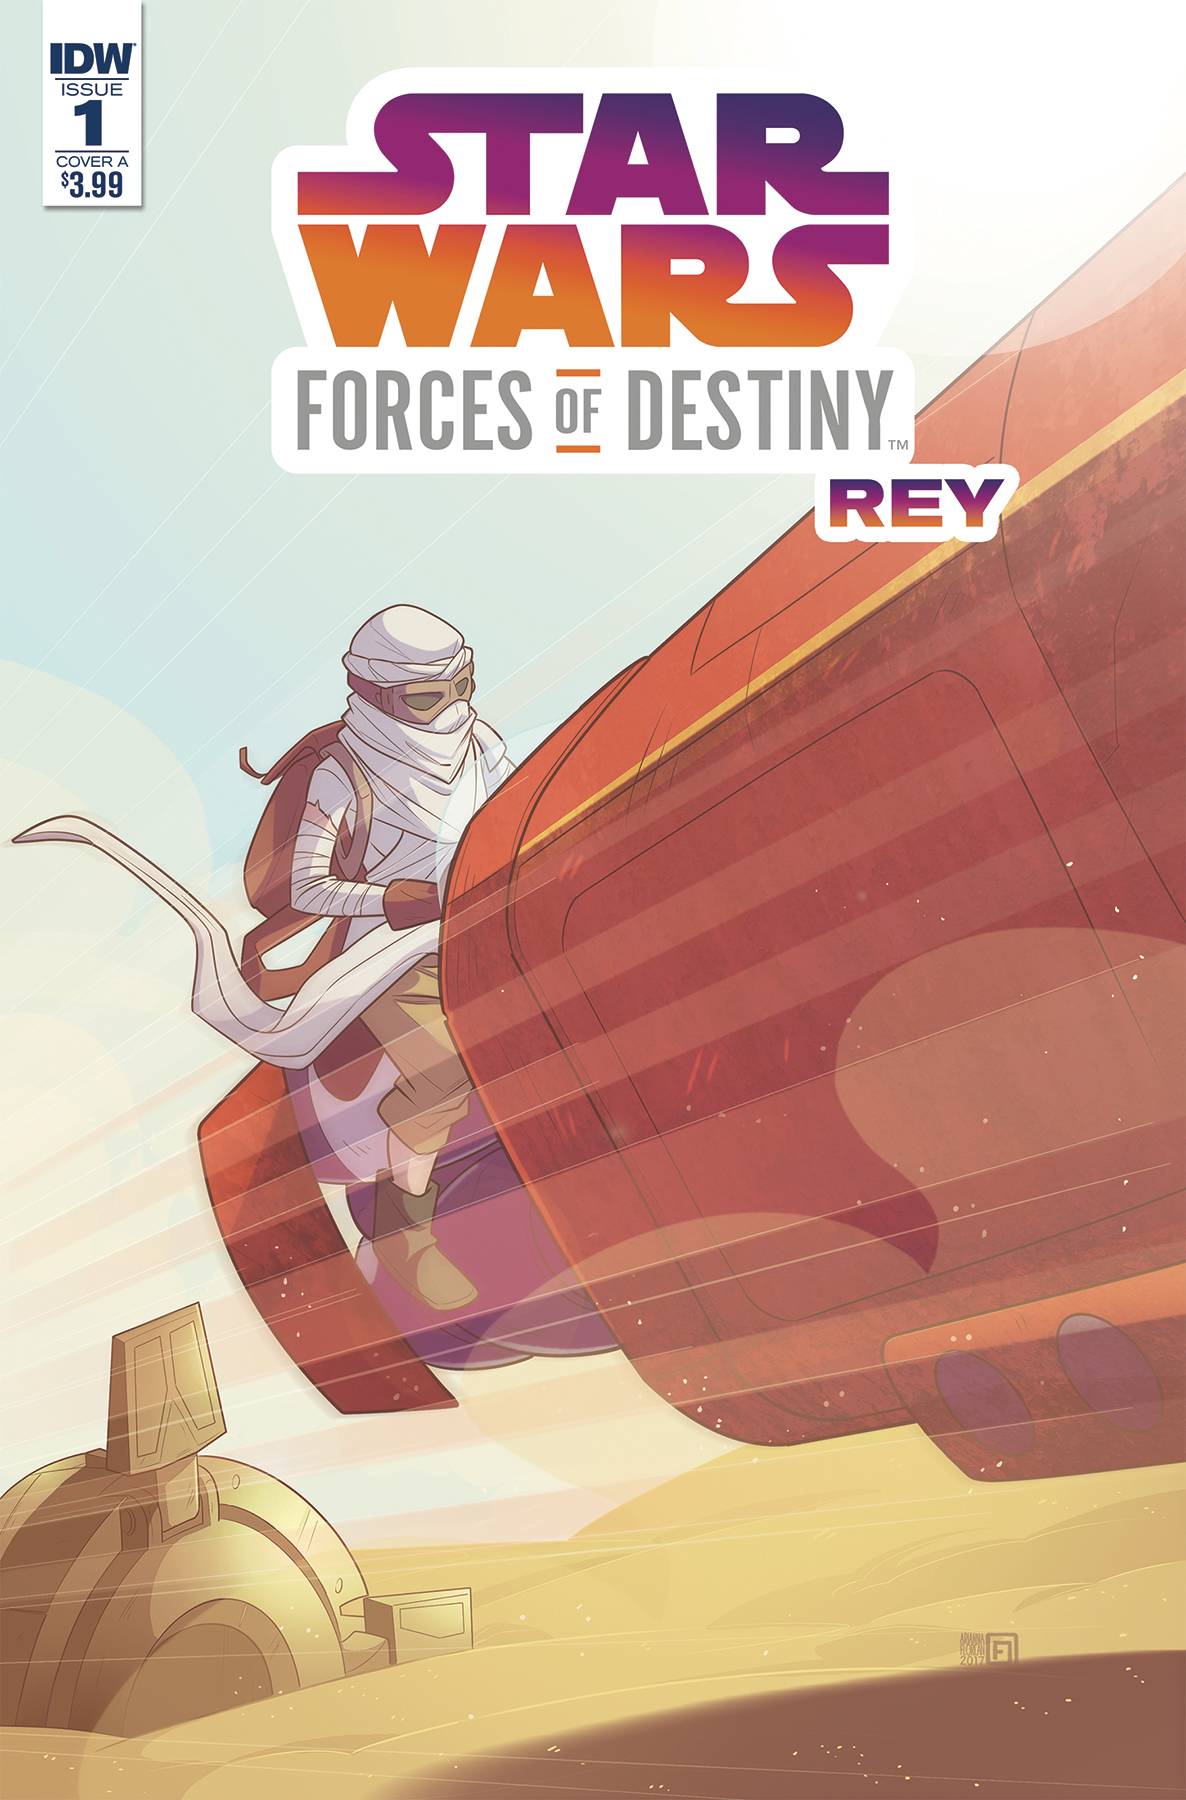 Star Wars Adventure Forces of Destiny Rey #1 Cover A